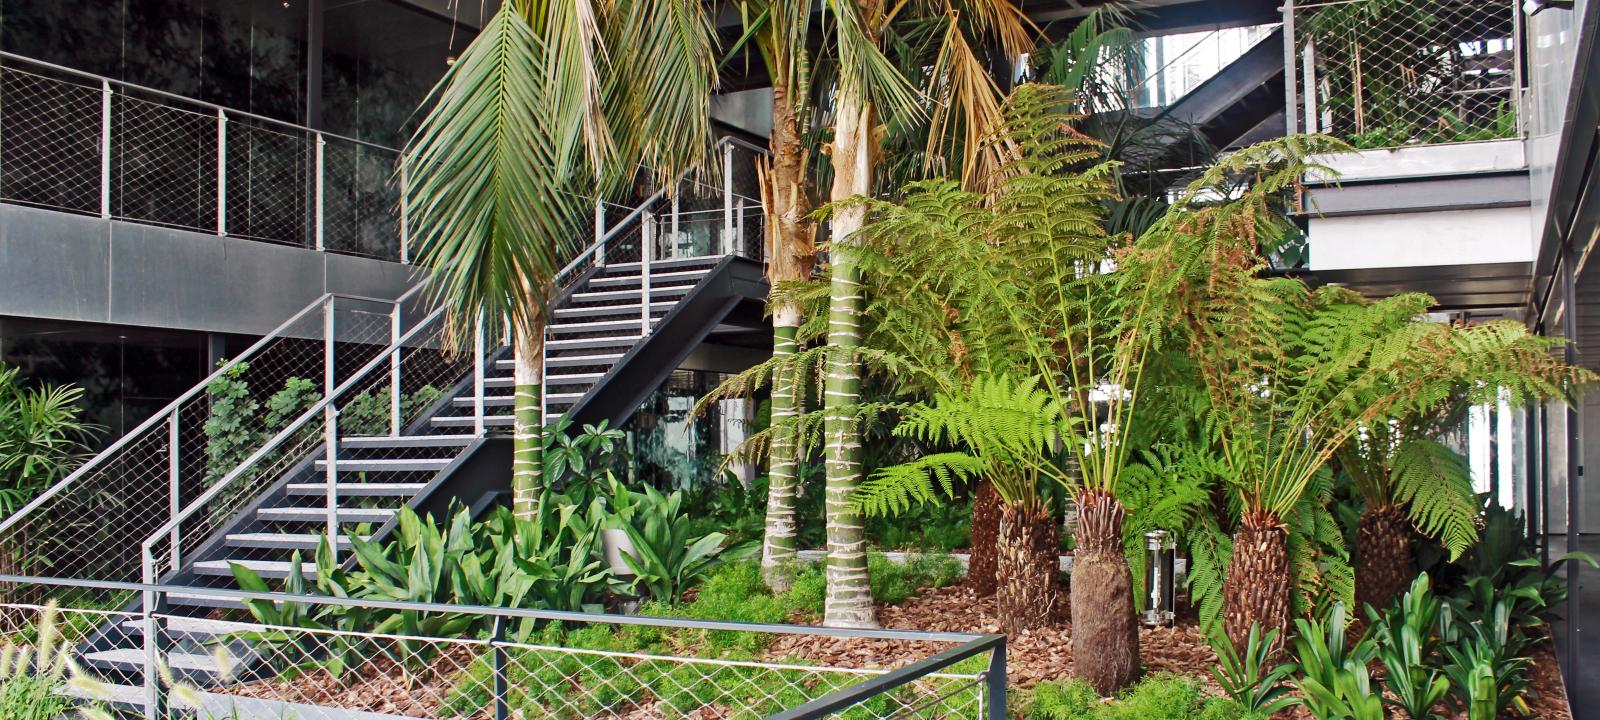 Palm trees and tropical plant within a building